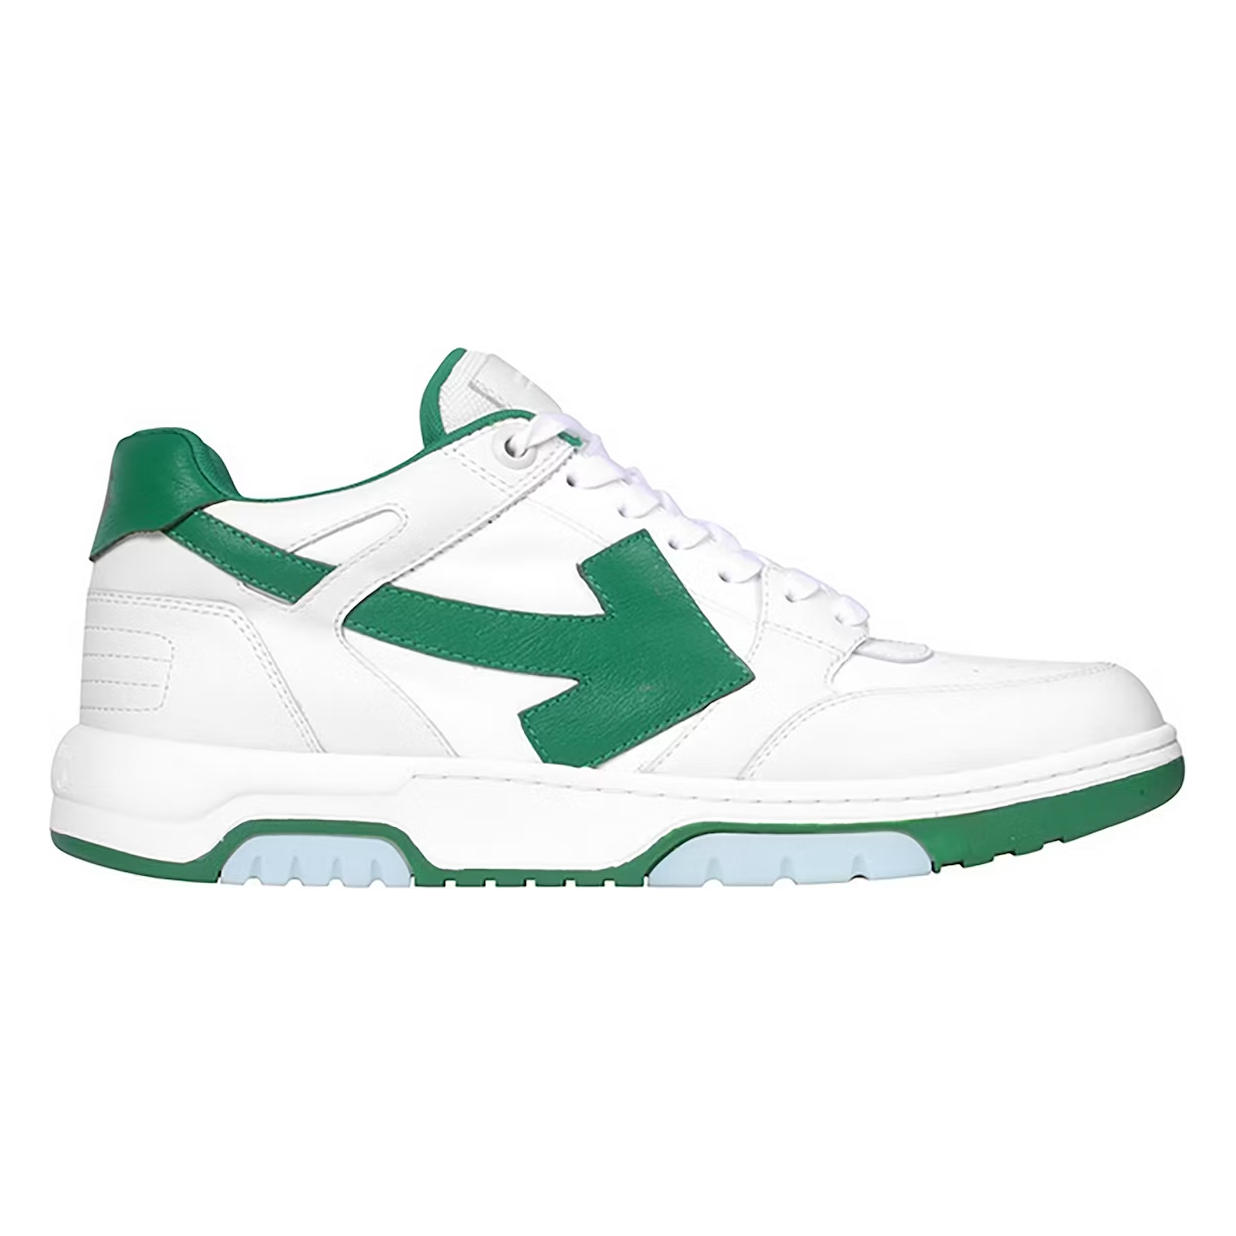 OFF-WHITE Out Of Office "OOO" Low White Green